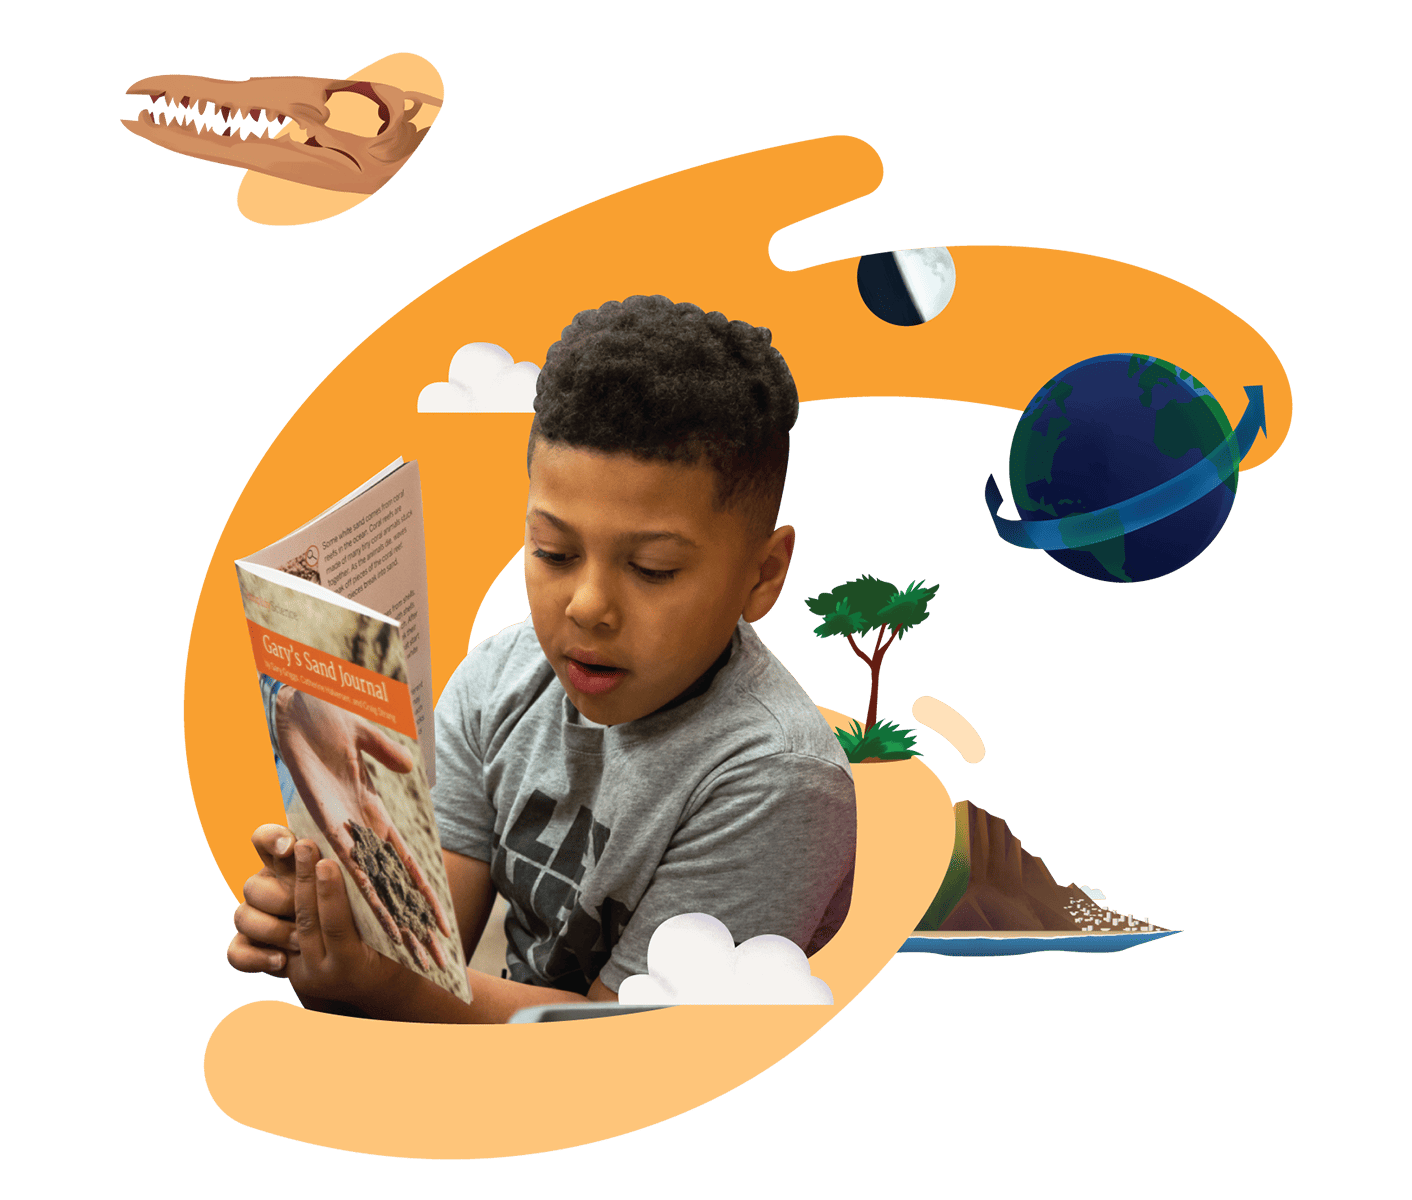 Young boy reading a science book with illustrated elements like a dinosaur skull, clouds, and a globe surrounding him.